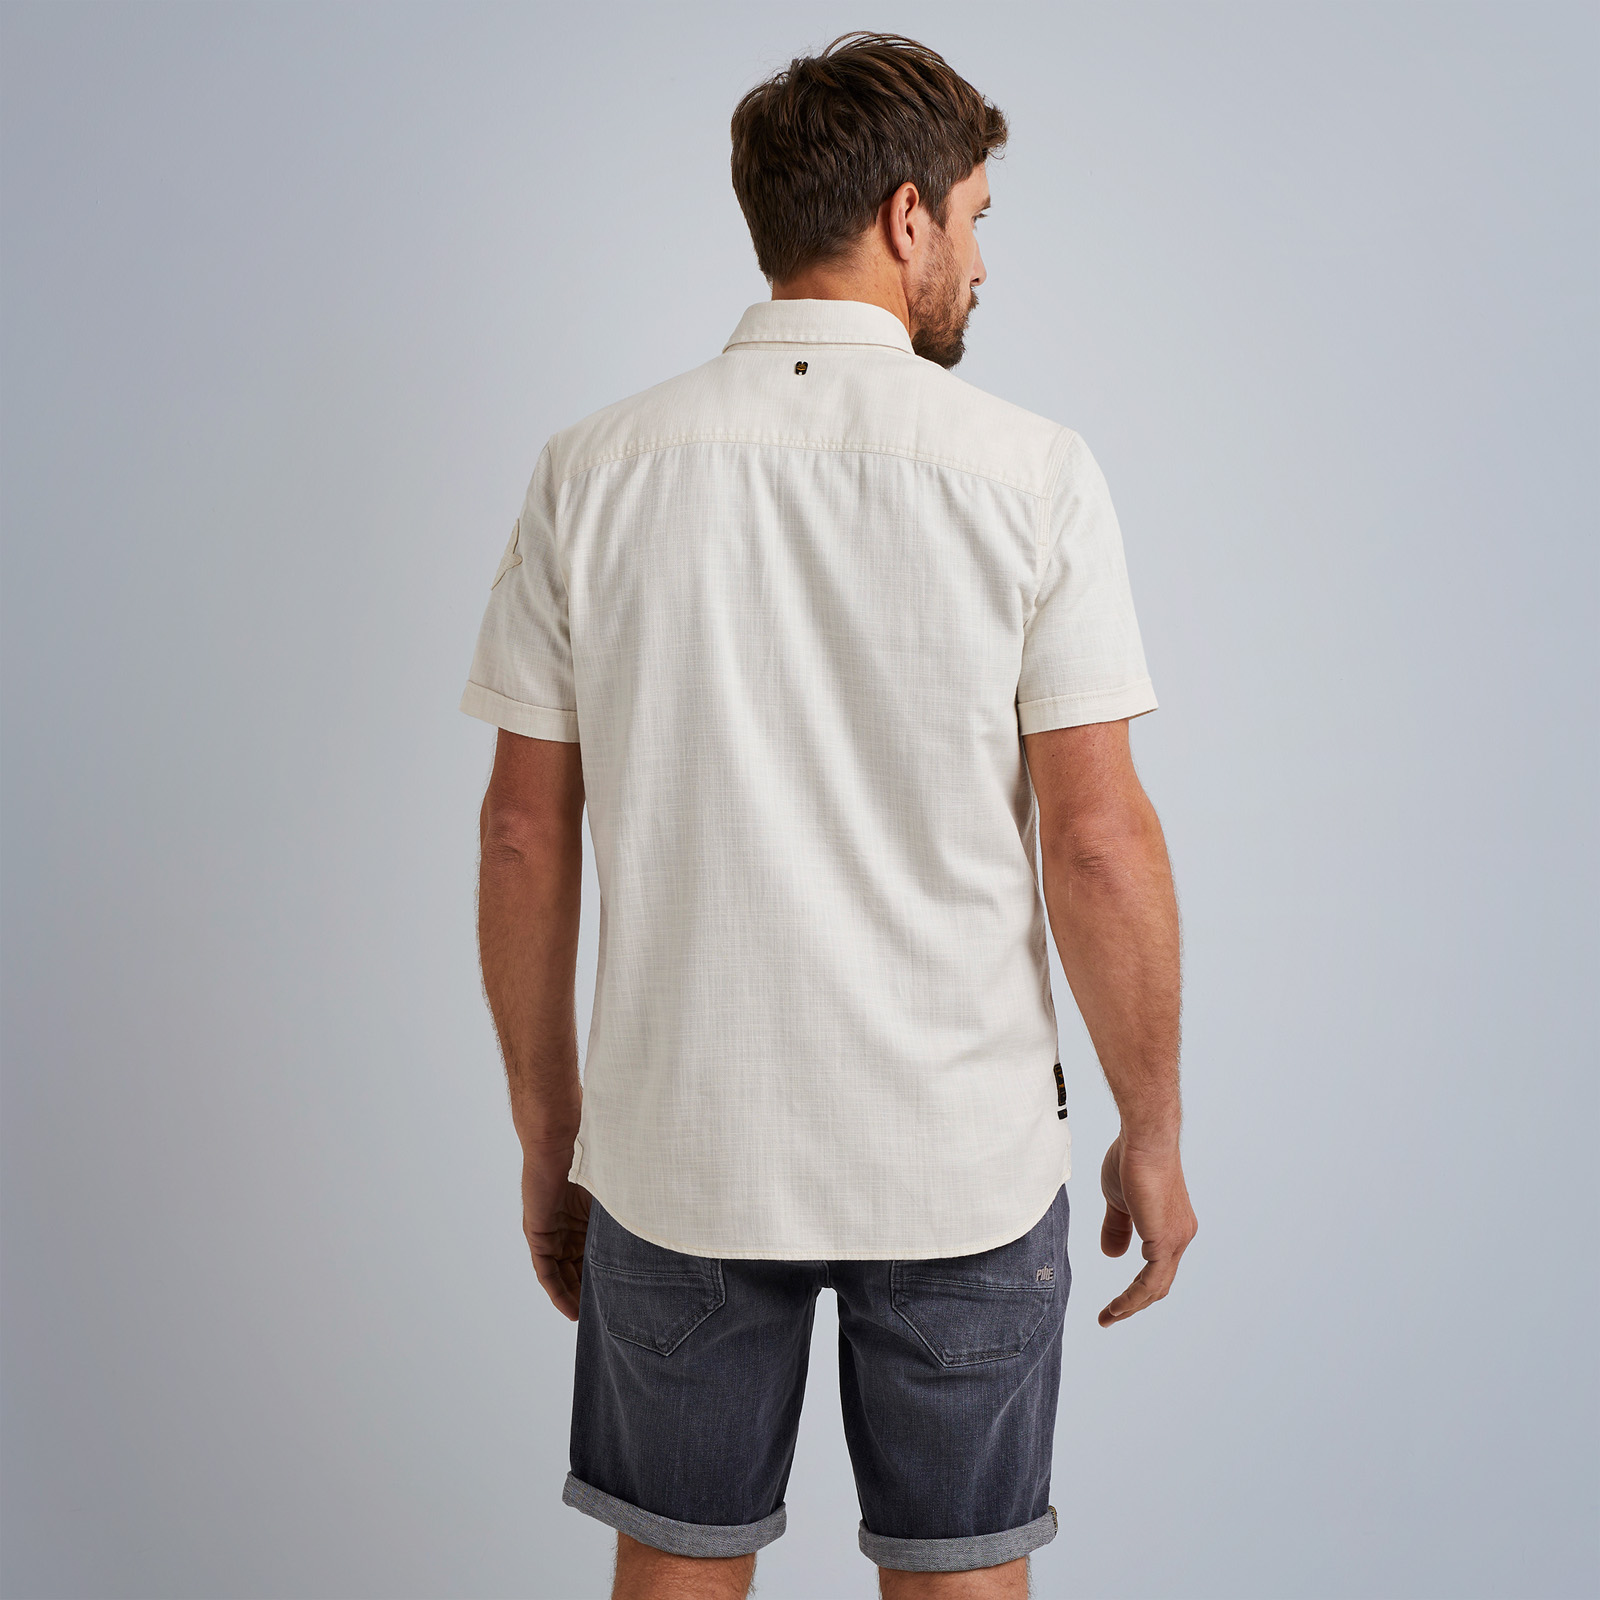 | PME Shirt LEGEND Short Cotton Sleeve and Free | returns shipping